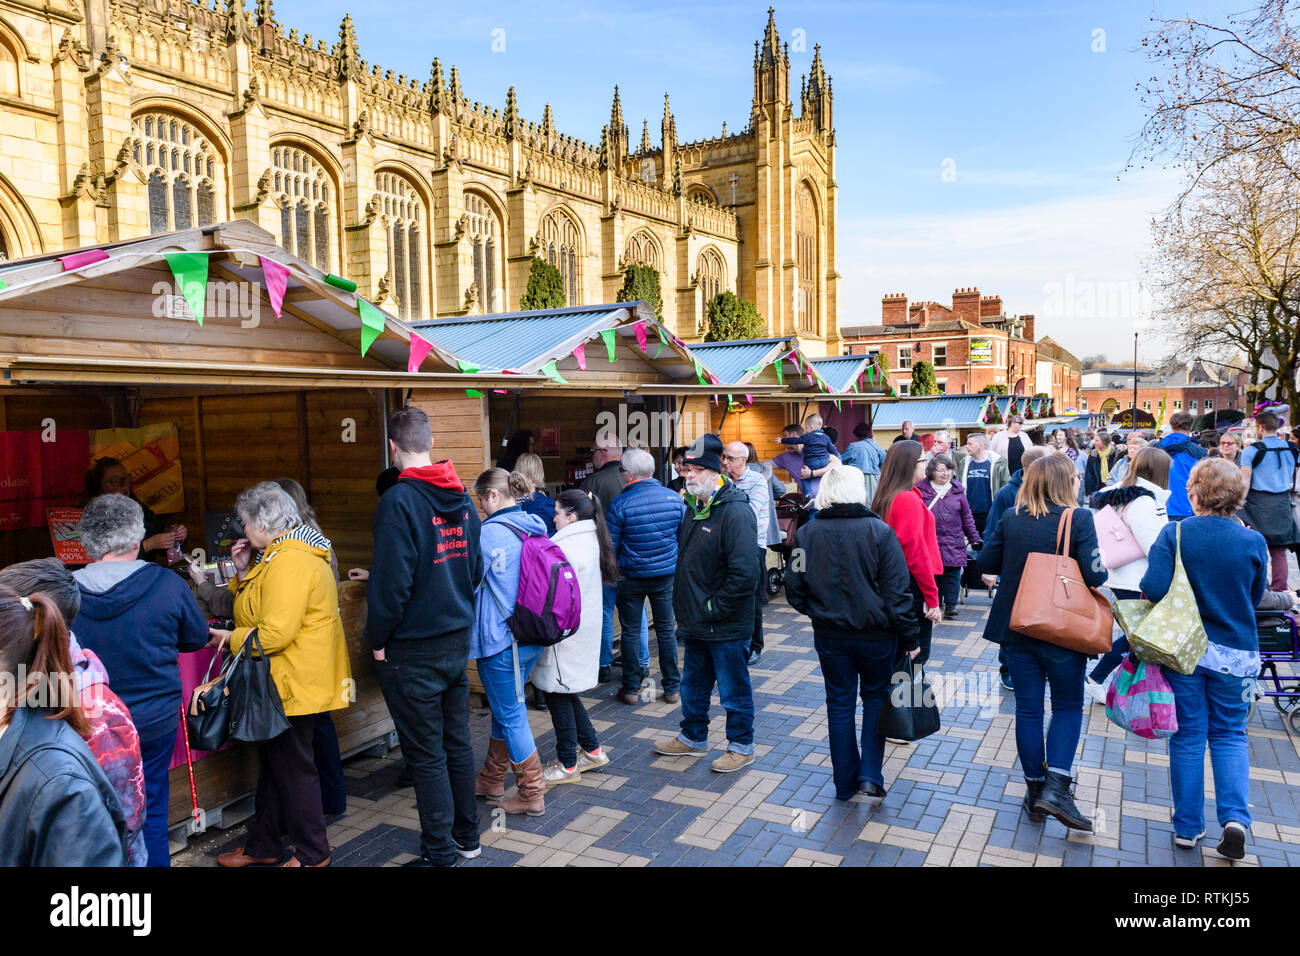 People shopping at busy Wakefield Food, Drink & Rhubarb Festival 2019, visiting market trade stalls & cathedral precinct - West Yorkshire, England, UK Stock Photo